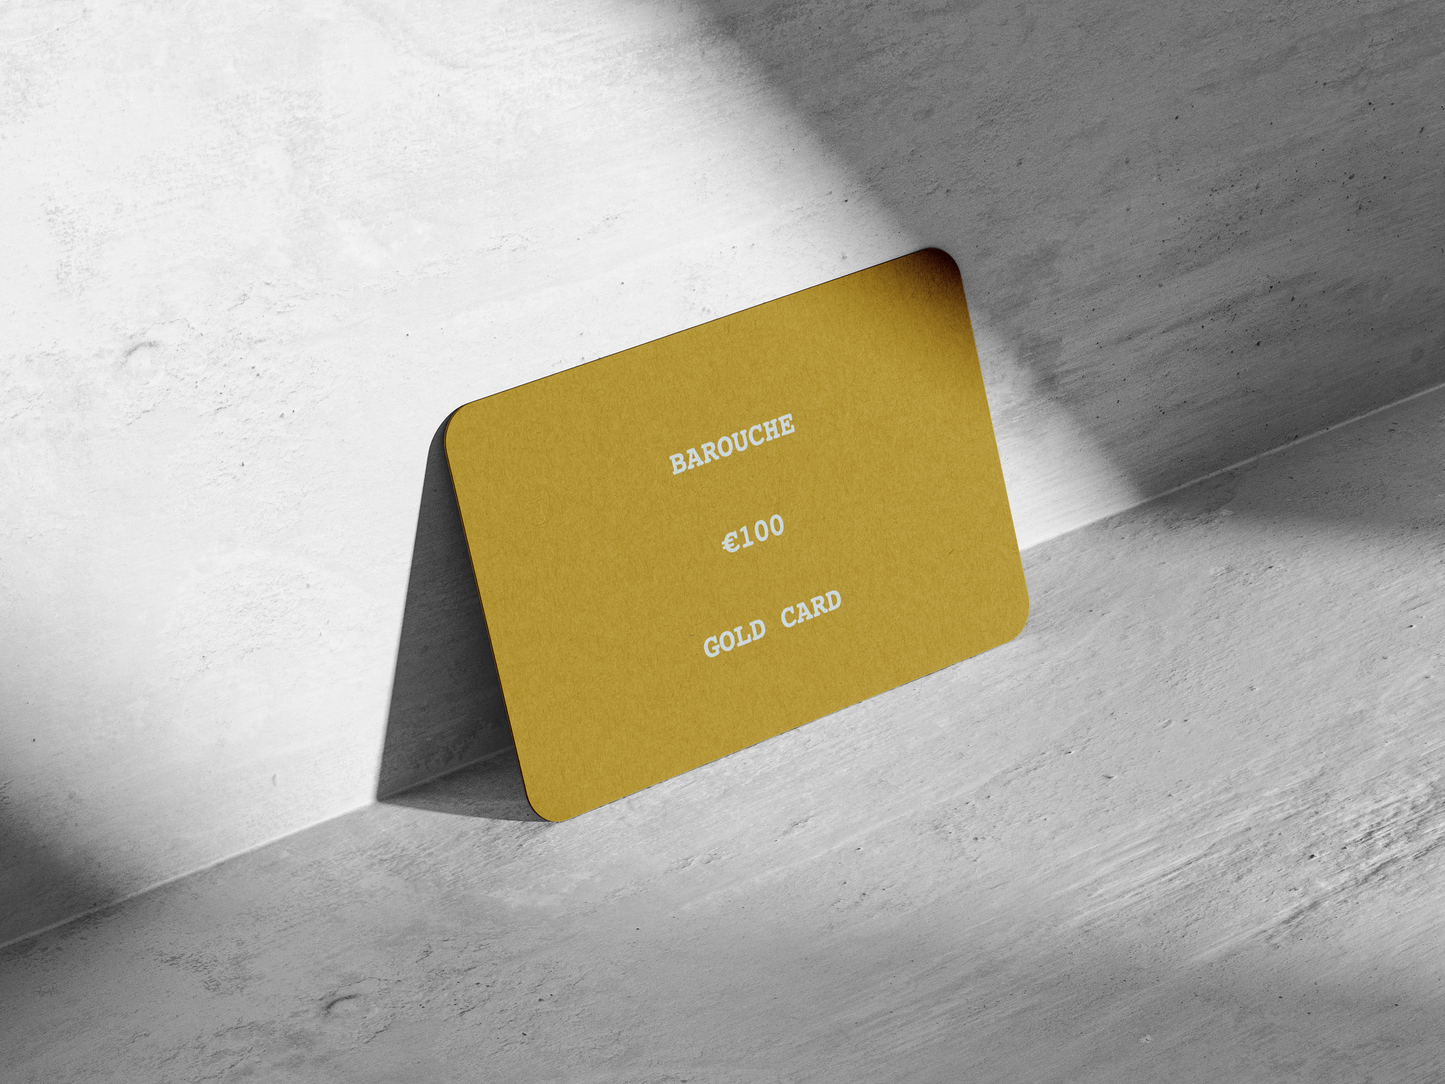 Gold card extra large